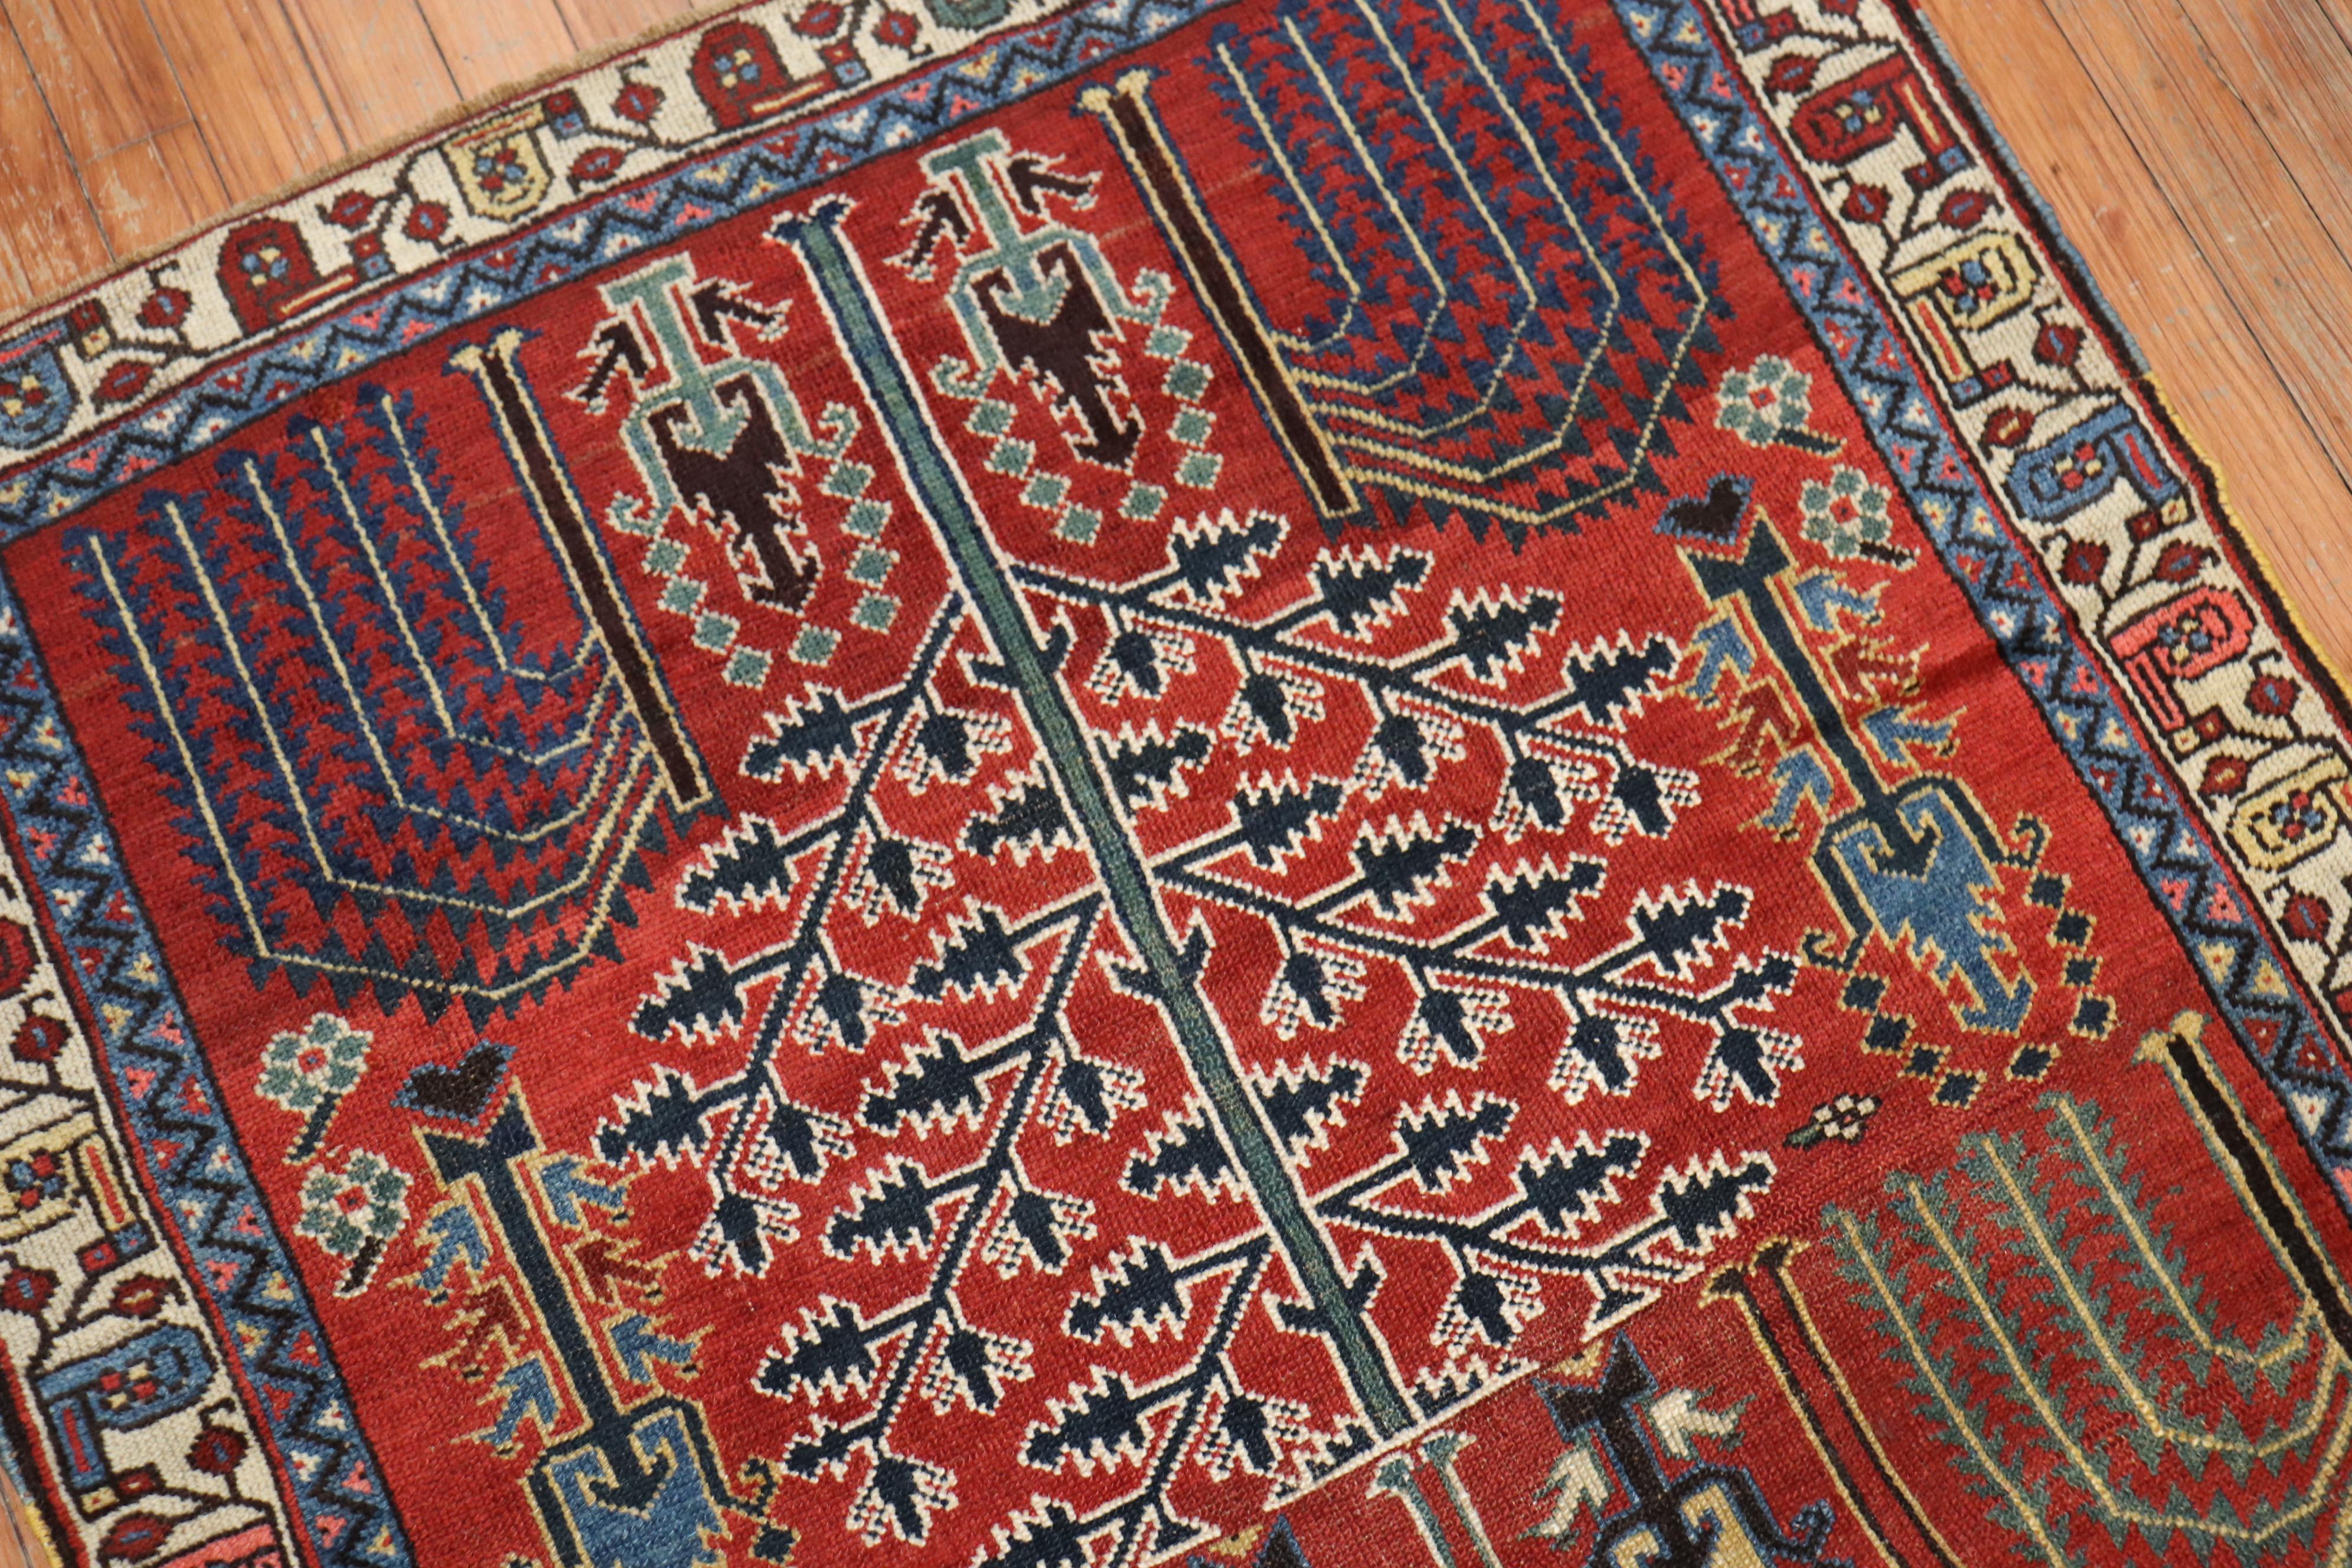 A colorful early 20th century Persian Kurd rug with a large scale weeping willow Tree motif on a rusty red ground

Measures: 3'5'' x 4'11''.